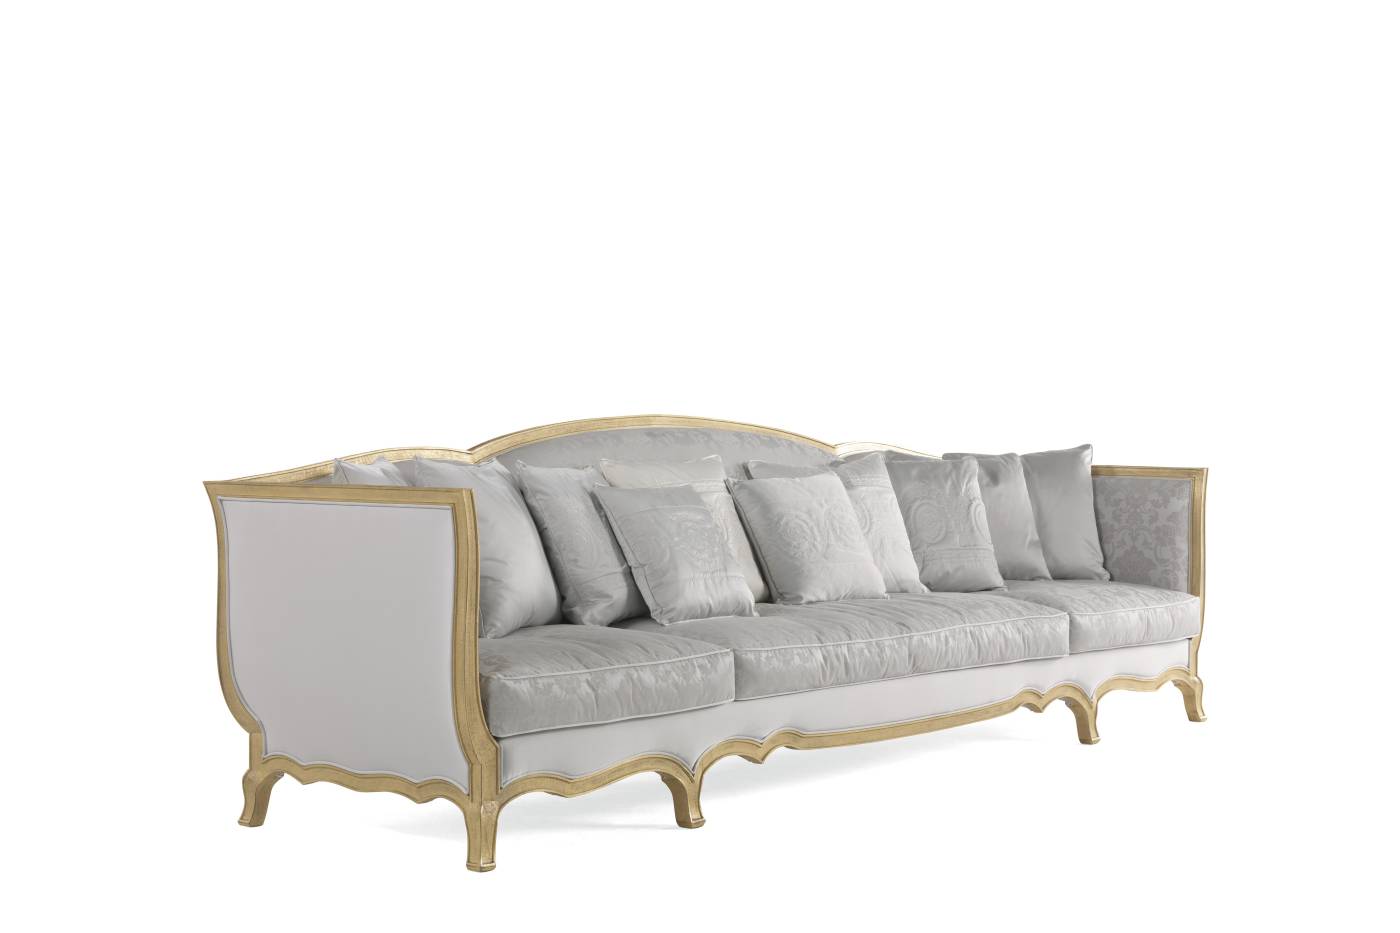 GRANDCAMÉE 2-seater sofa - 3-seater sofa - armchair – Jumbo Collection Italian luxury classic sofas. tailor-made interior design projects to meet all your furnishing needs